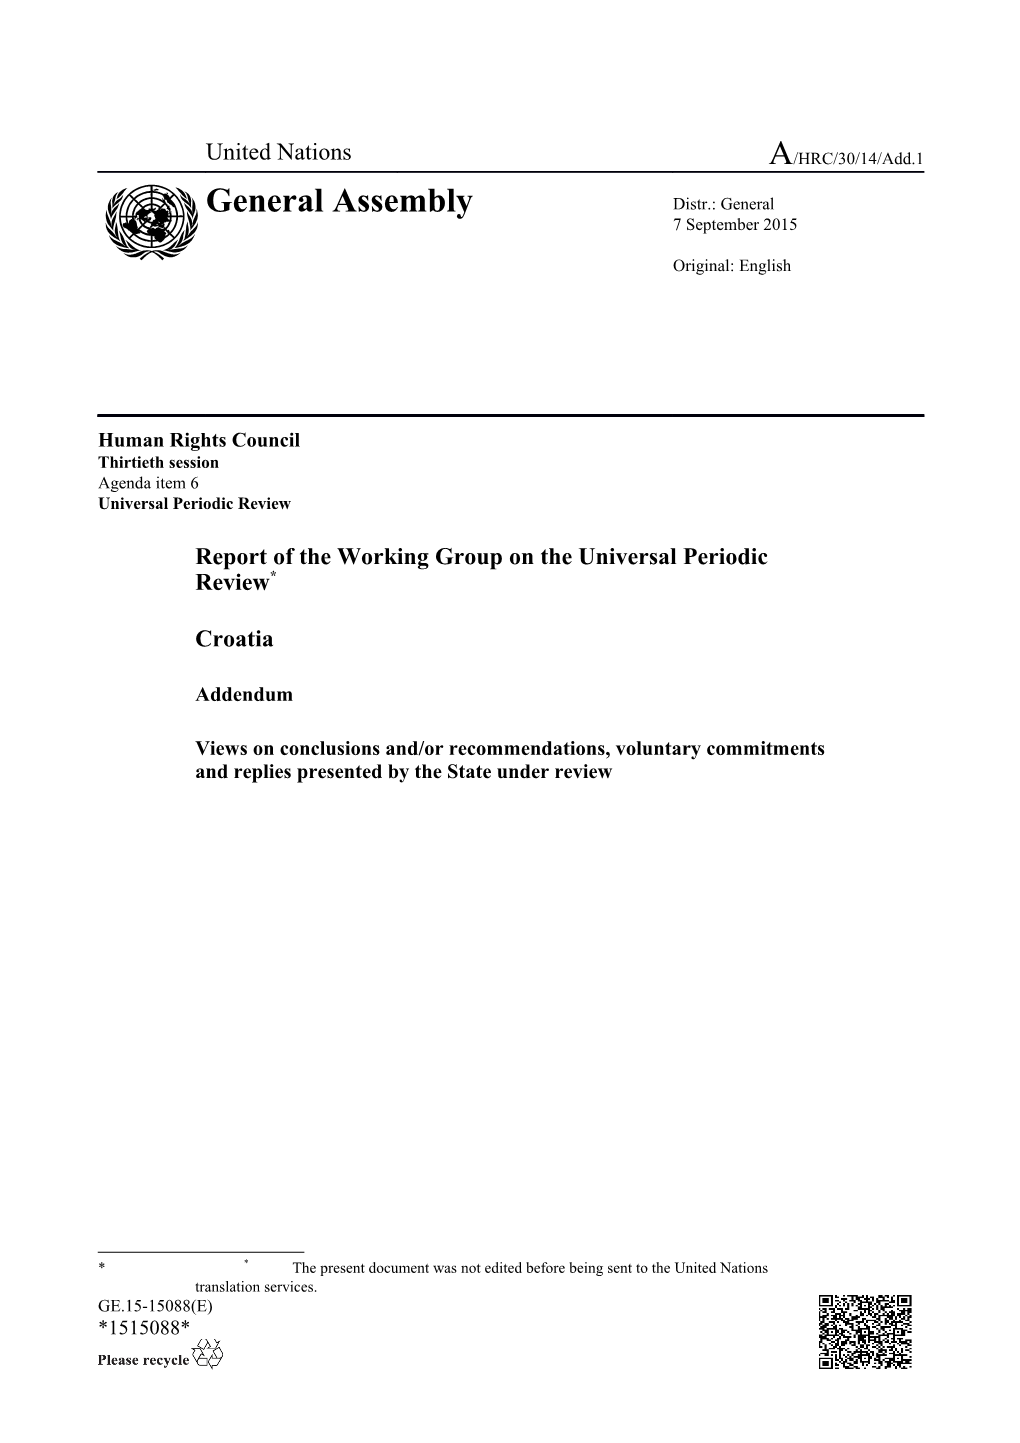 Addendum of the Report of the Working Group on the Universal Periodic Review - Croatia